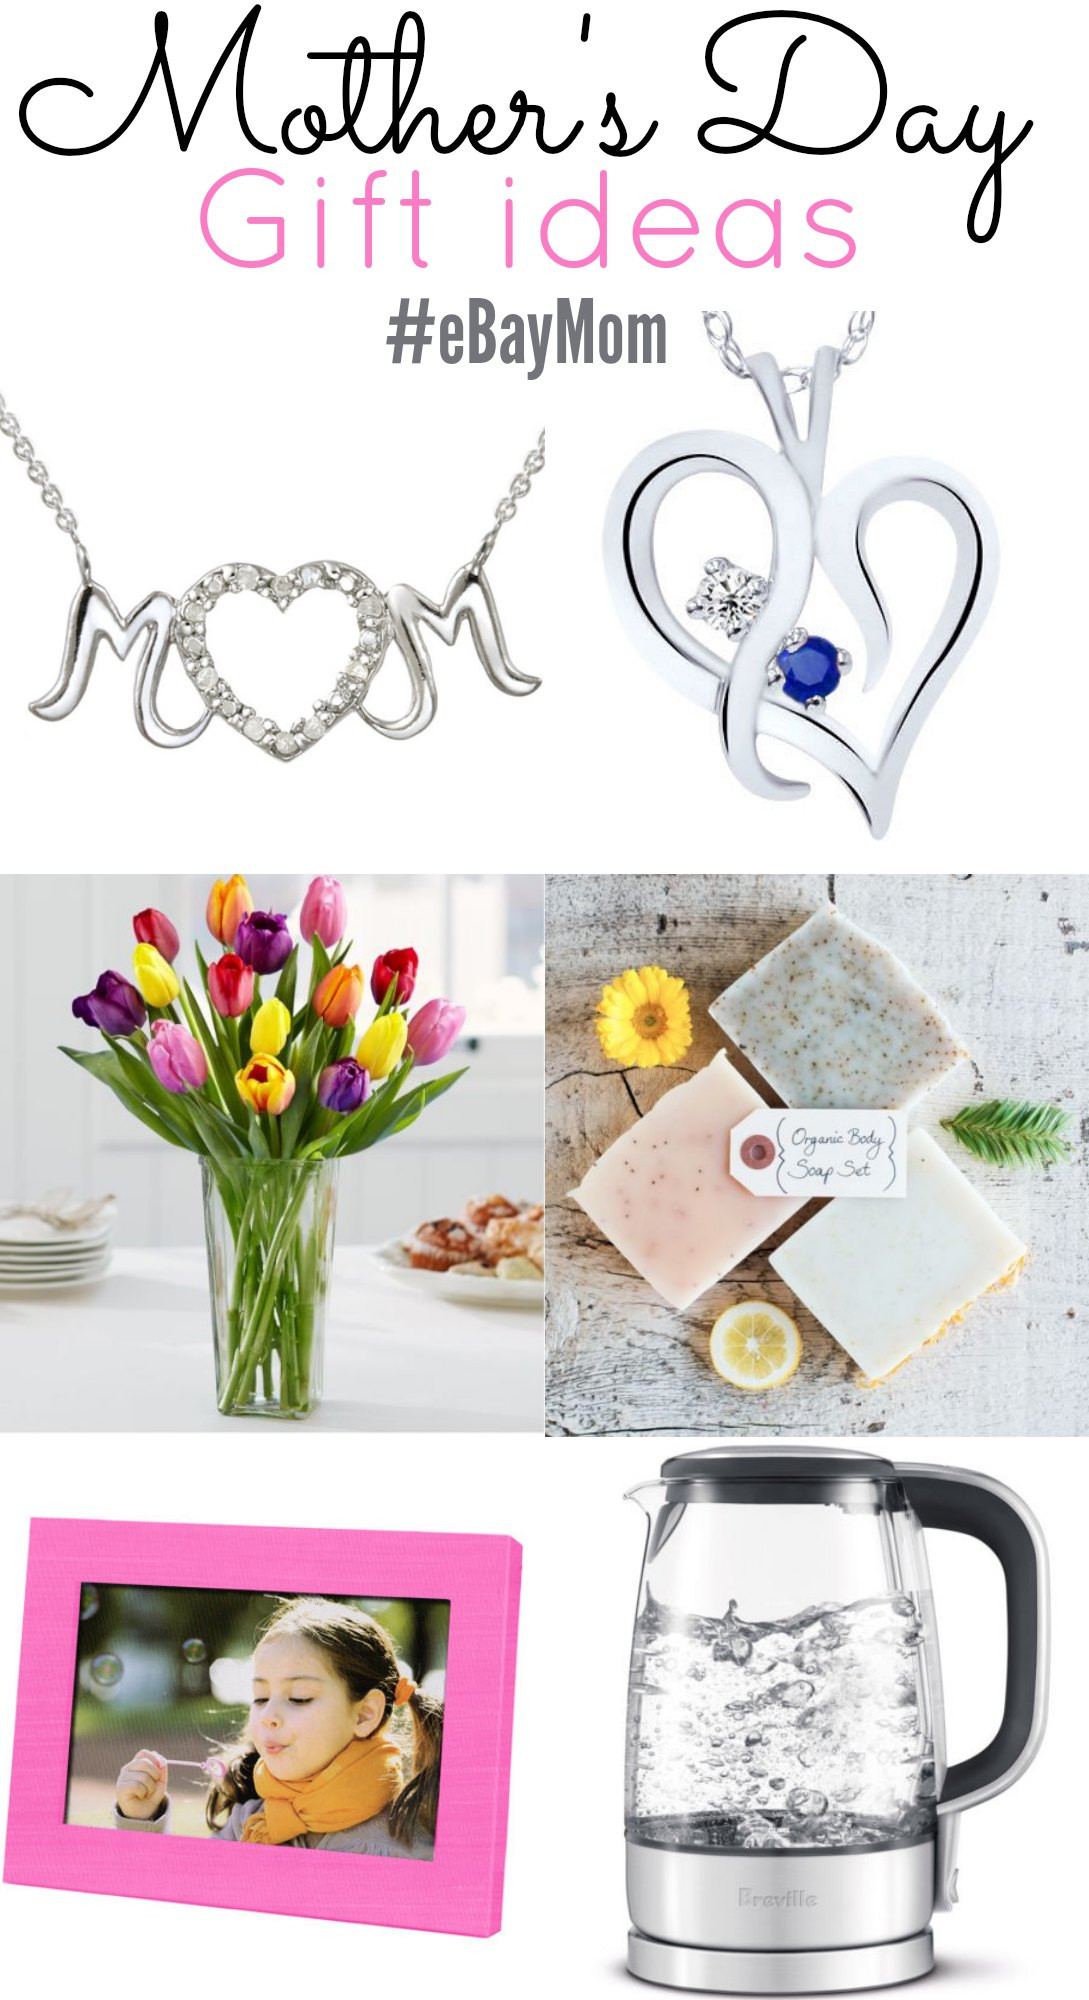 Mothers Da Gift Ideas
 Mother’s Day Gift Ideas & Sweepstakes eBayMom ad